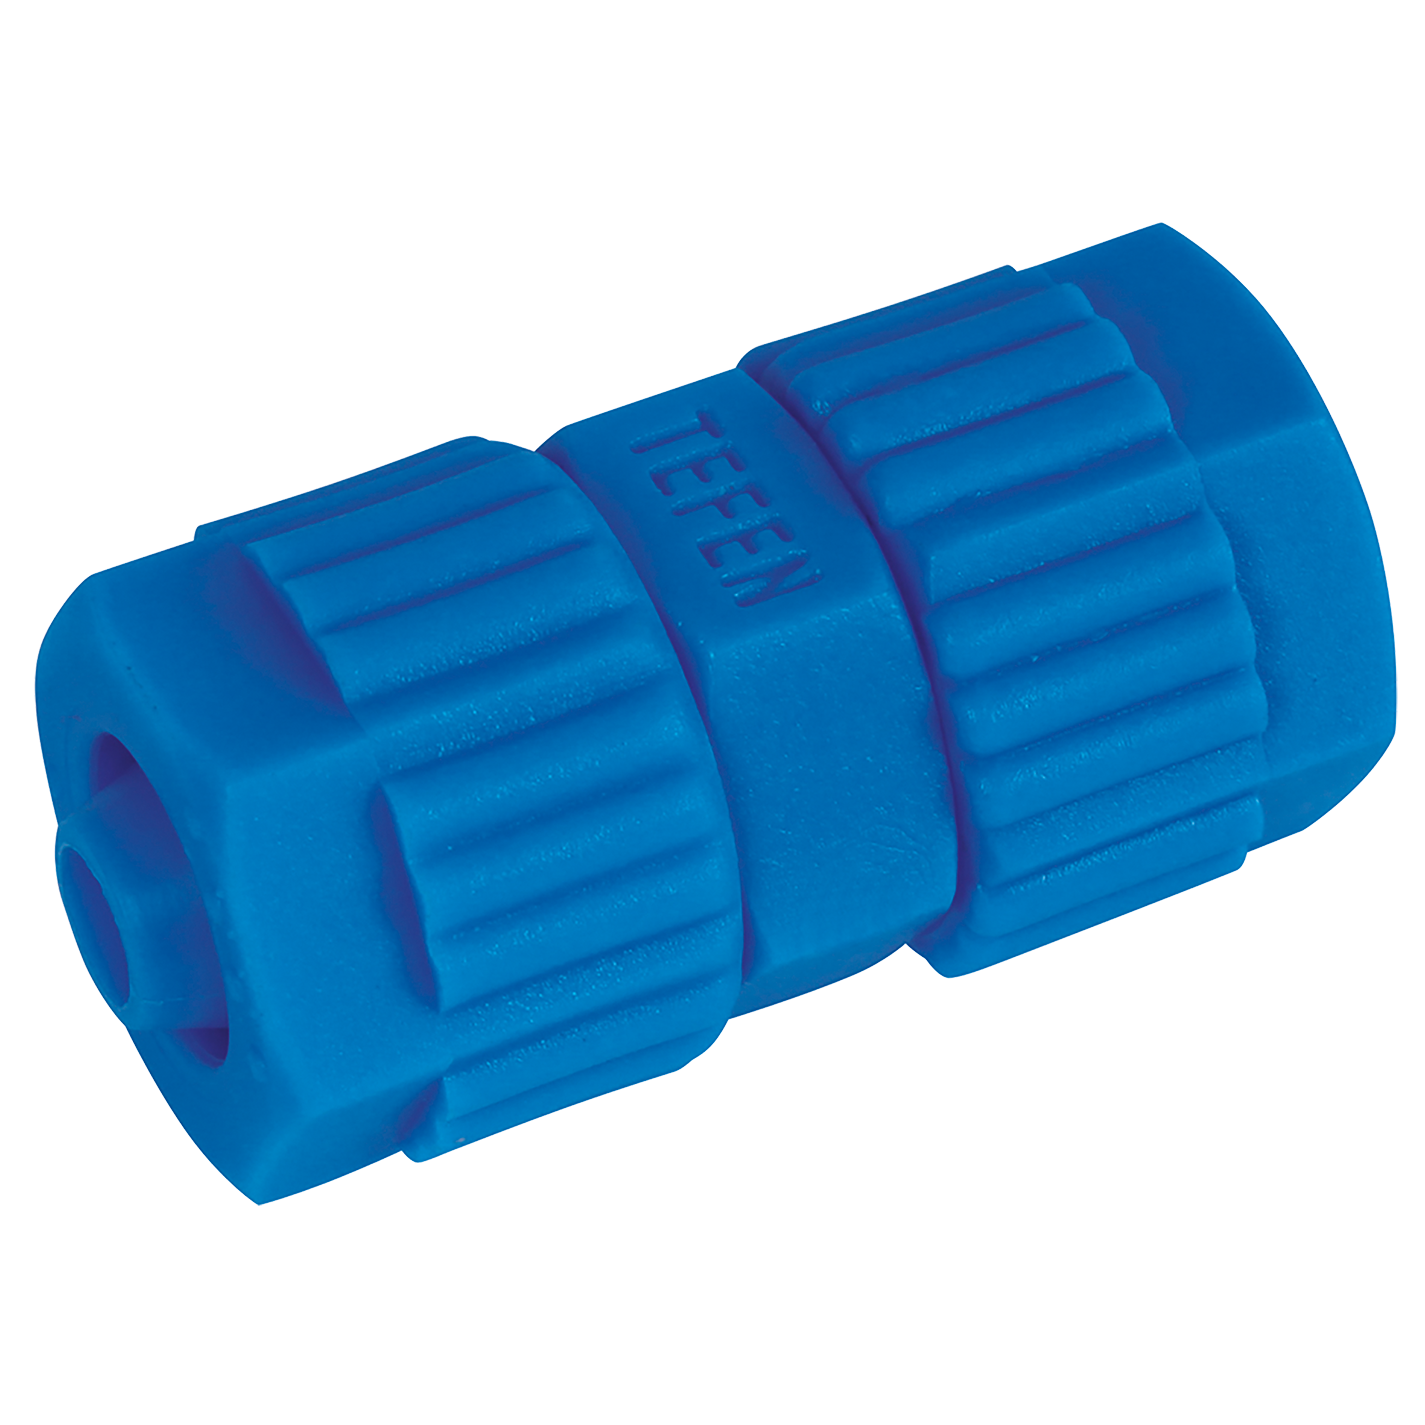 8 x 6mm OD Reducing Connector